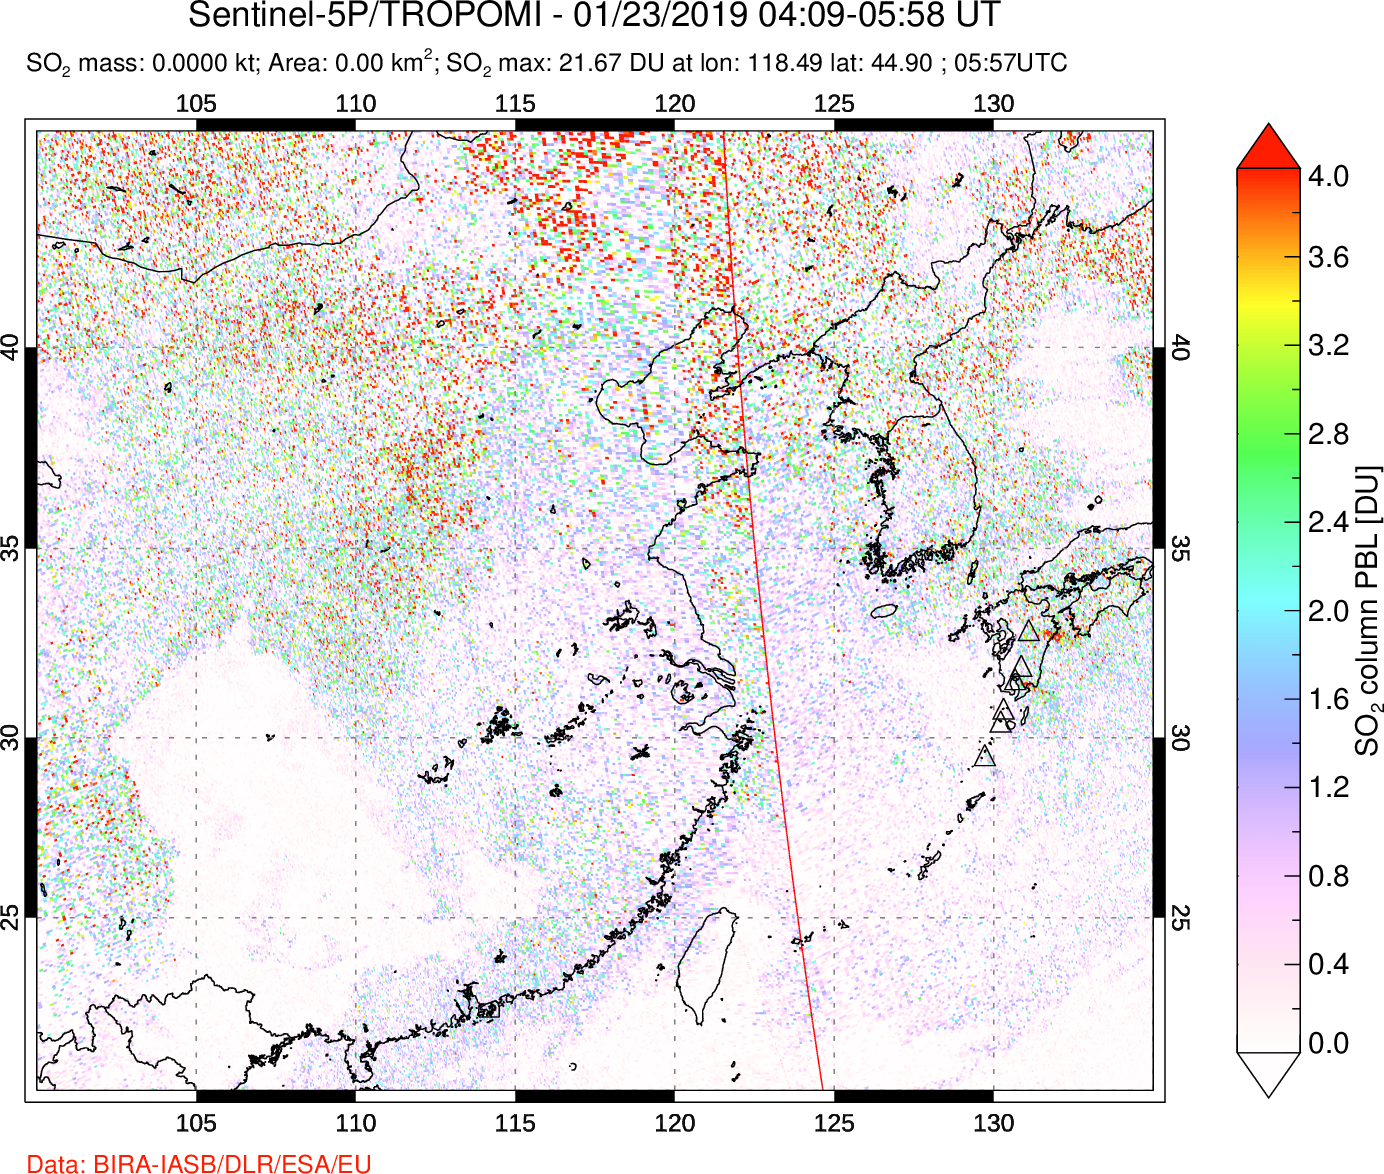 A sulfur dioxide image over Eastern China on Jan 23, 2019.